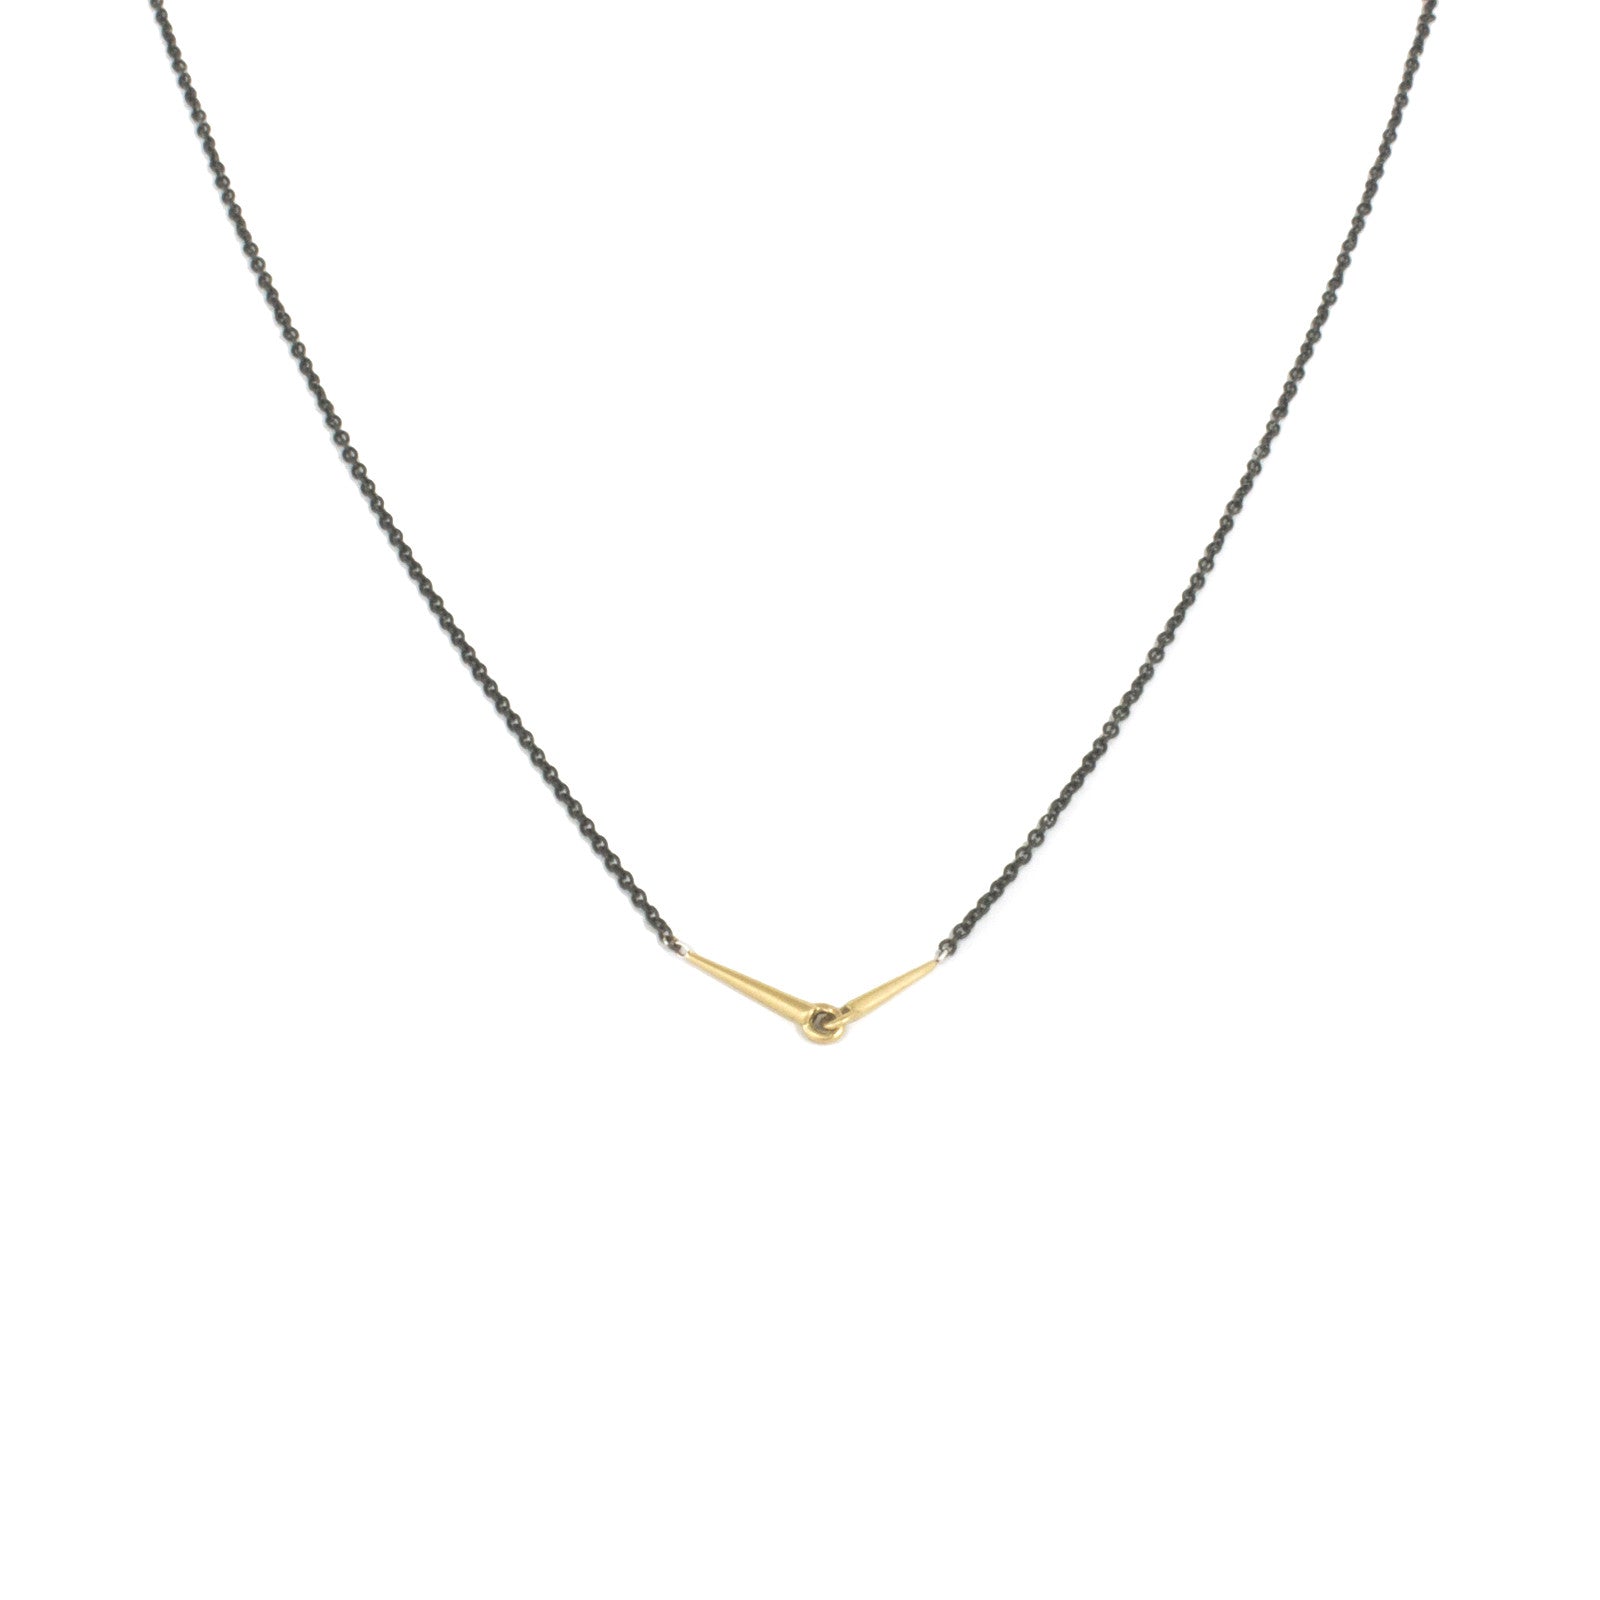 18k yellow gold with oxidized silver chain / small mirror points necklace